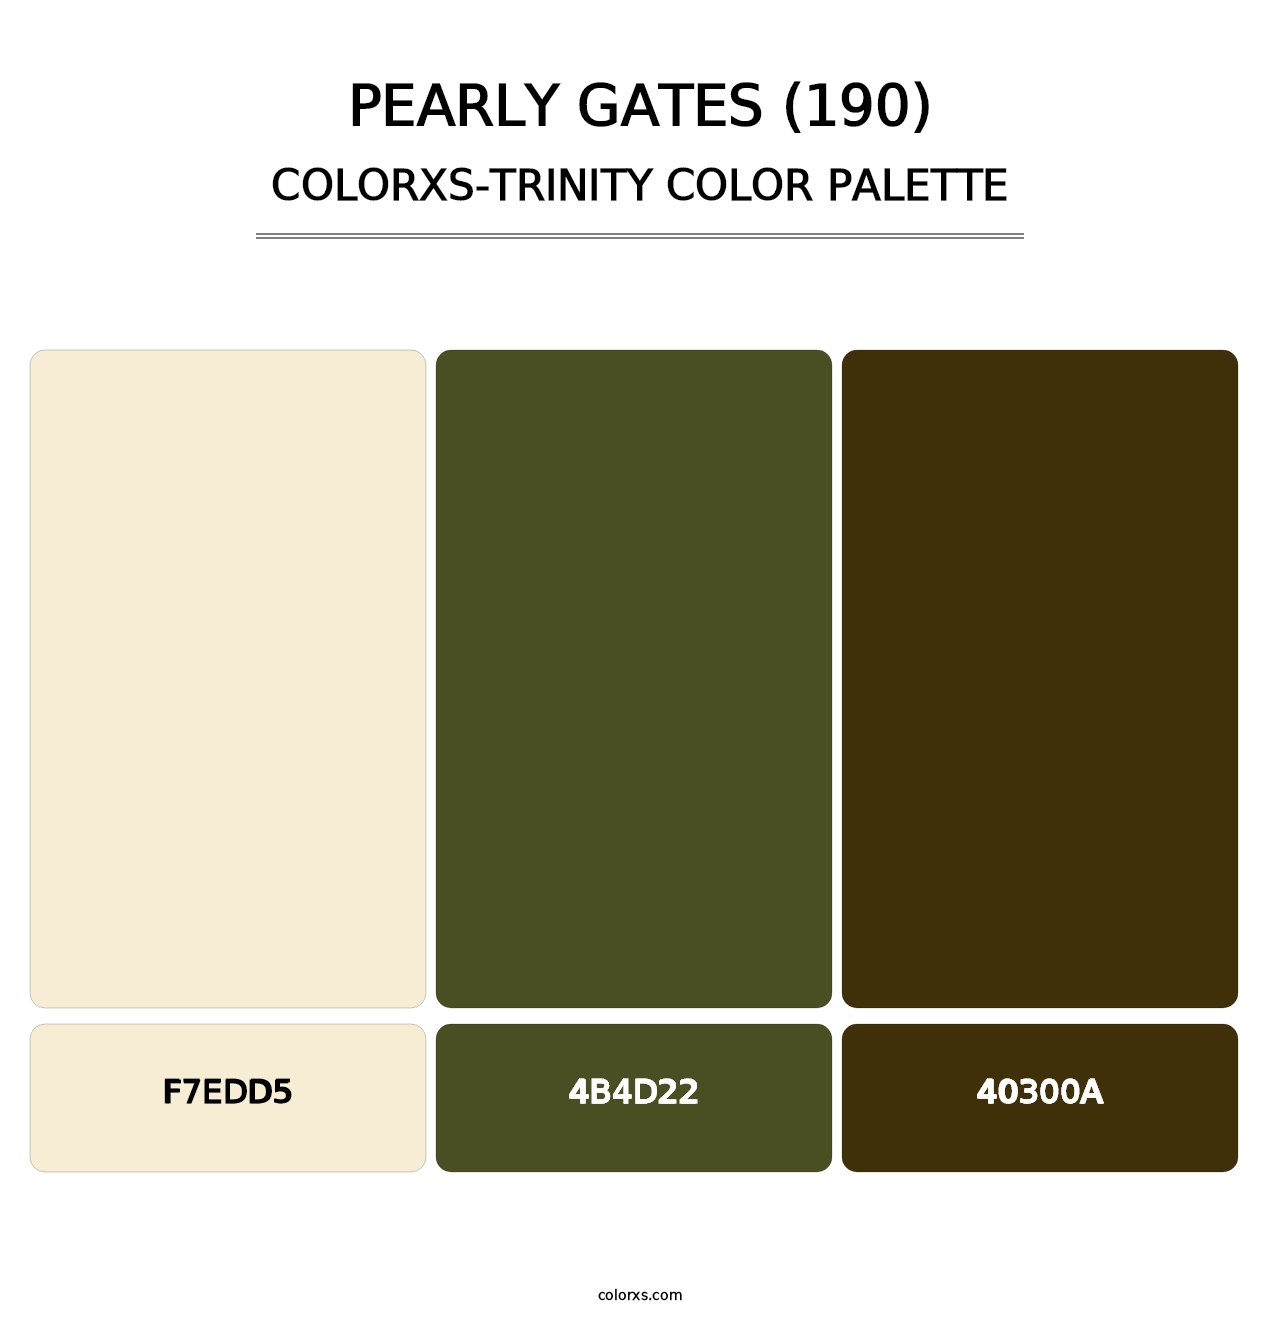 Pearly Gates (190) - Colorxs Trinity Palette